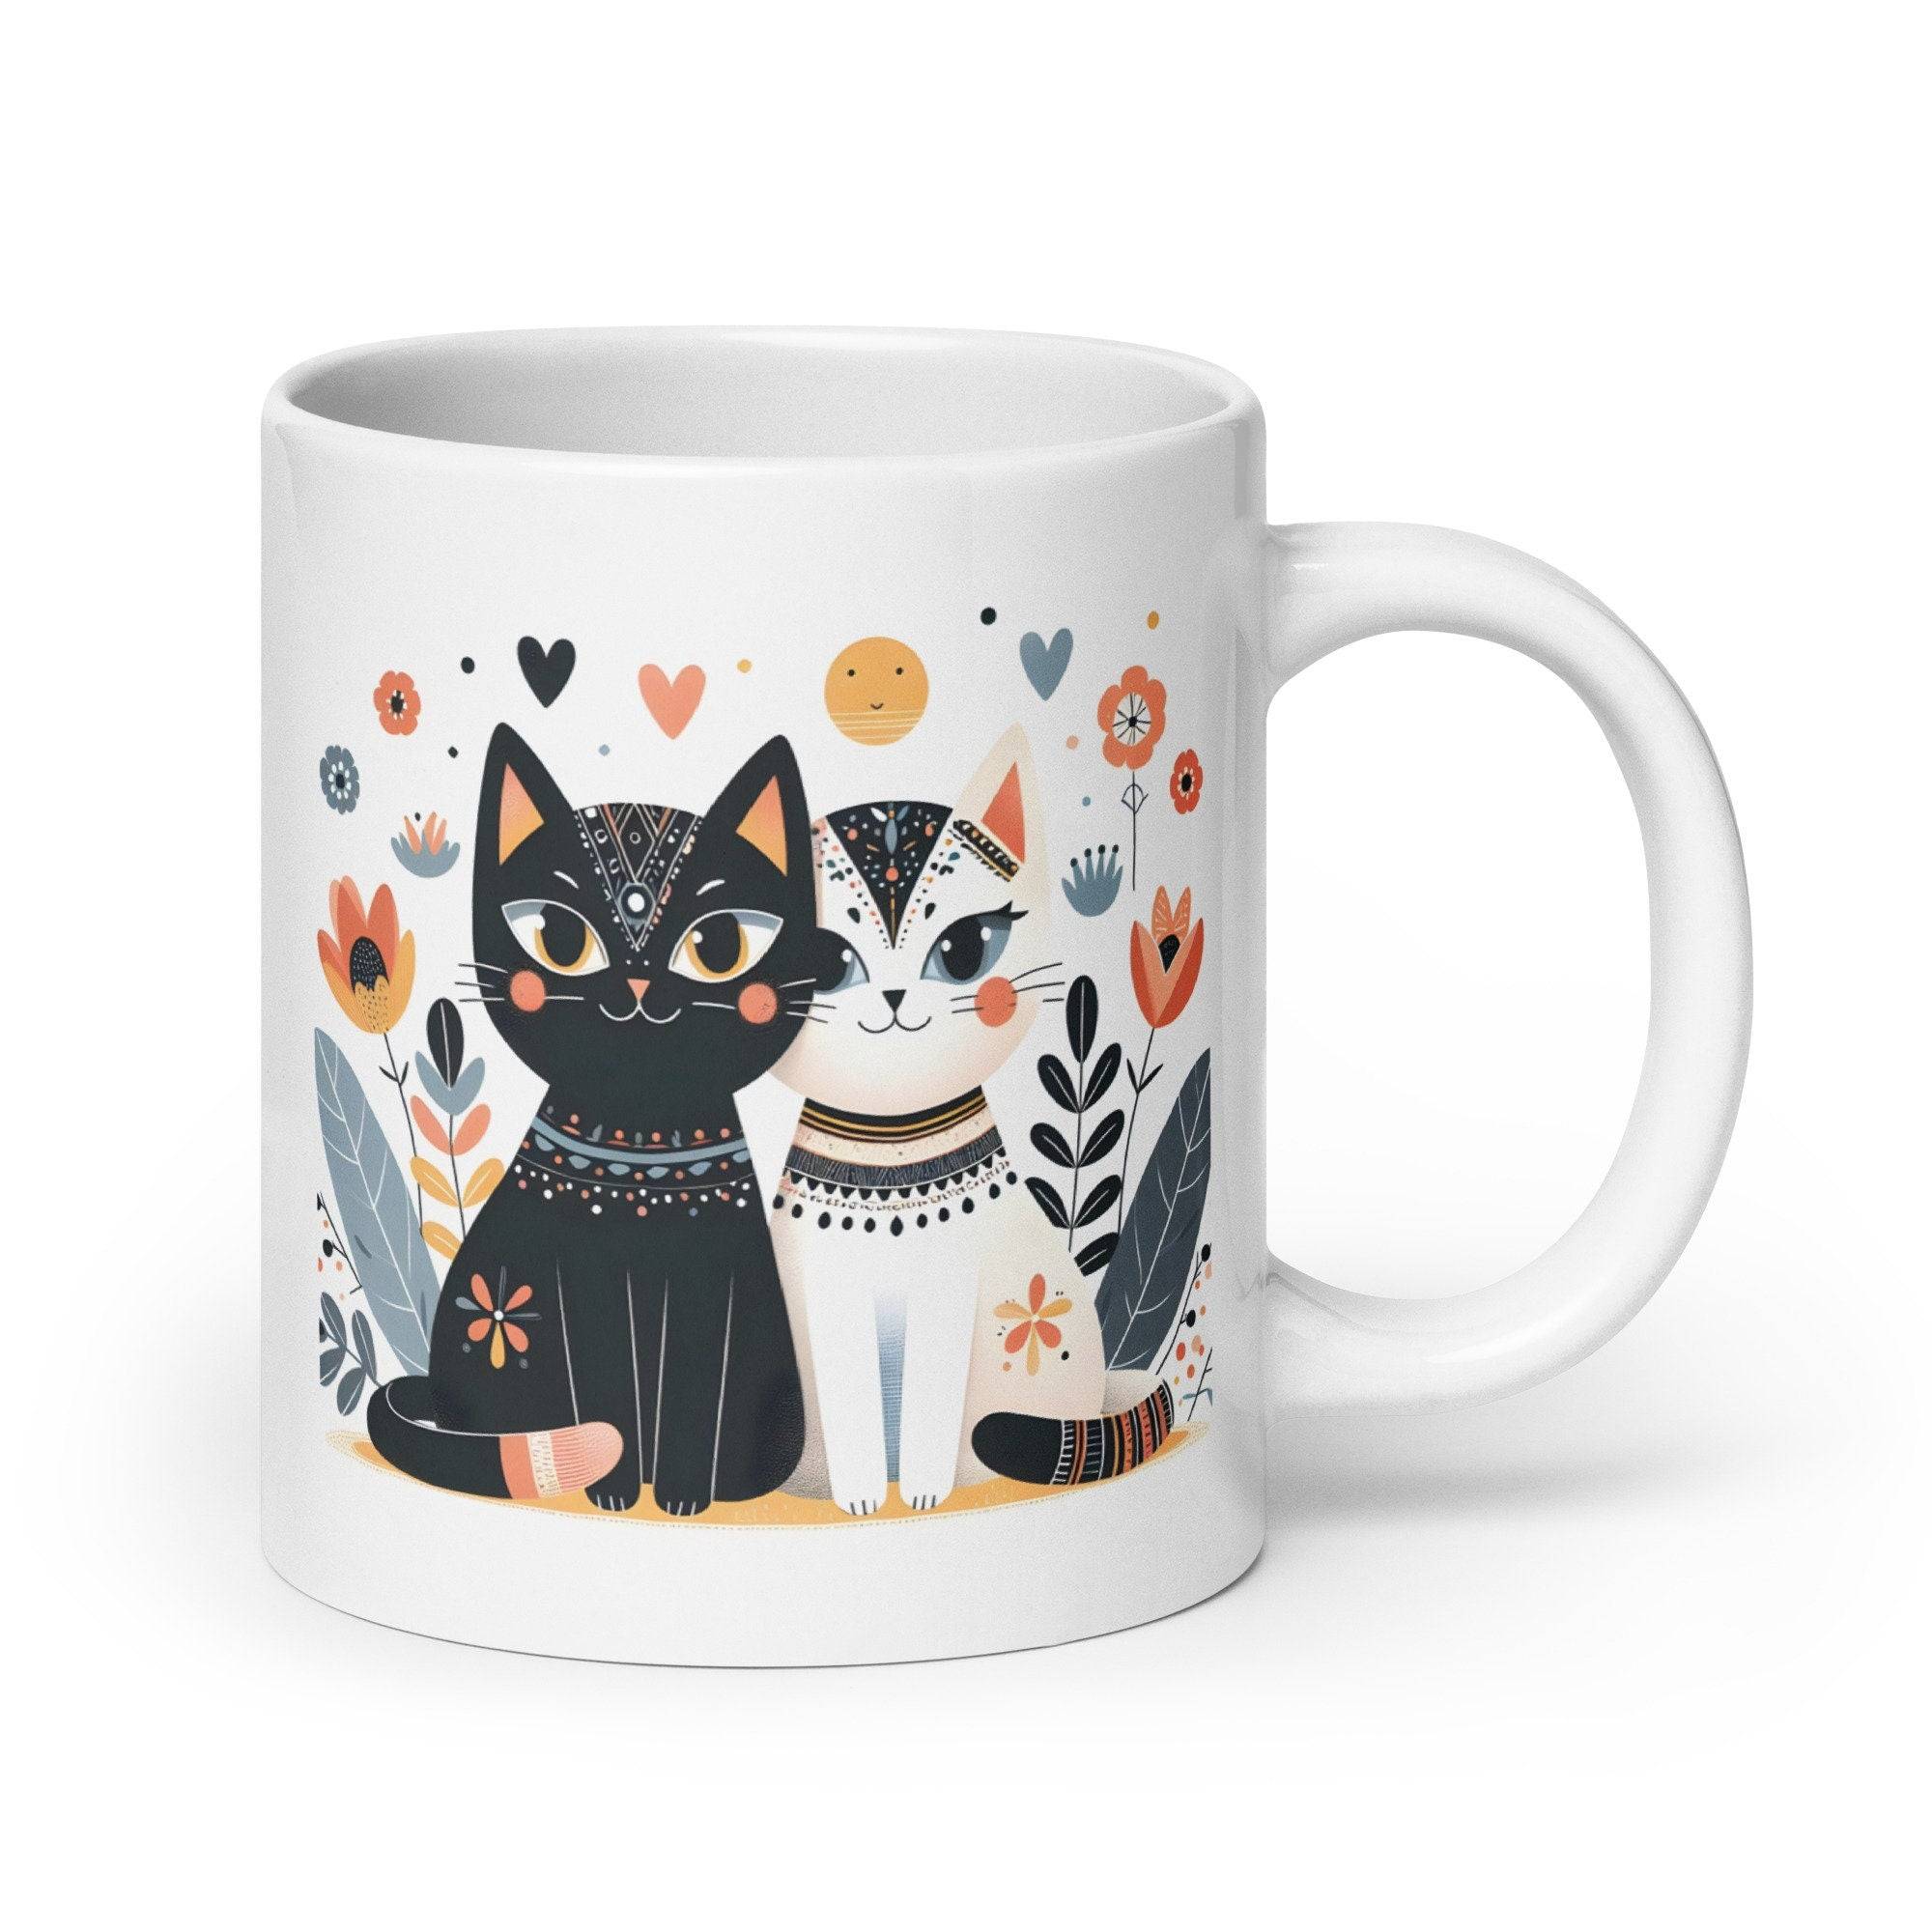 Cat Couple Mug - Minimalist Boho Style, Perfect Coffee Cup for Cat Lovers, Unique Anniversary Gift Littlecutiepaws